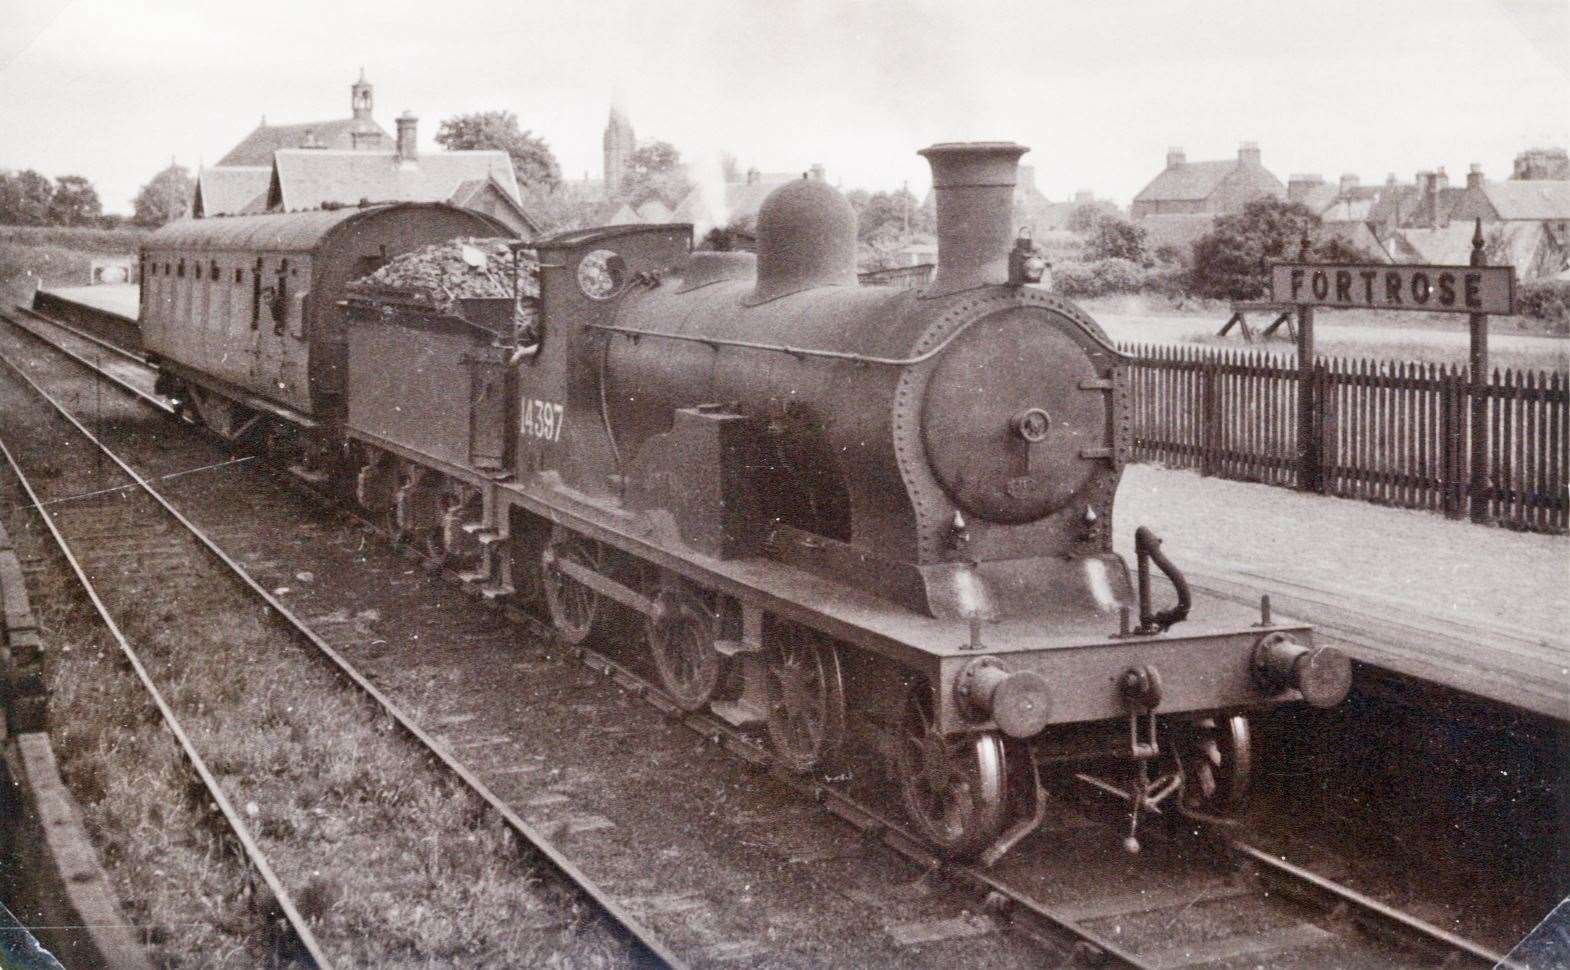 A train at Fortrose Station in 1947. Picture: Highland Railway Society - Am Baile.